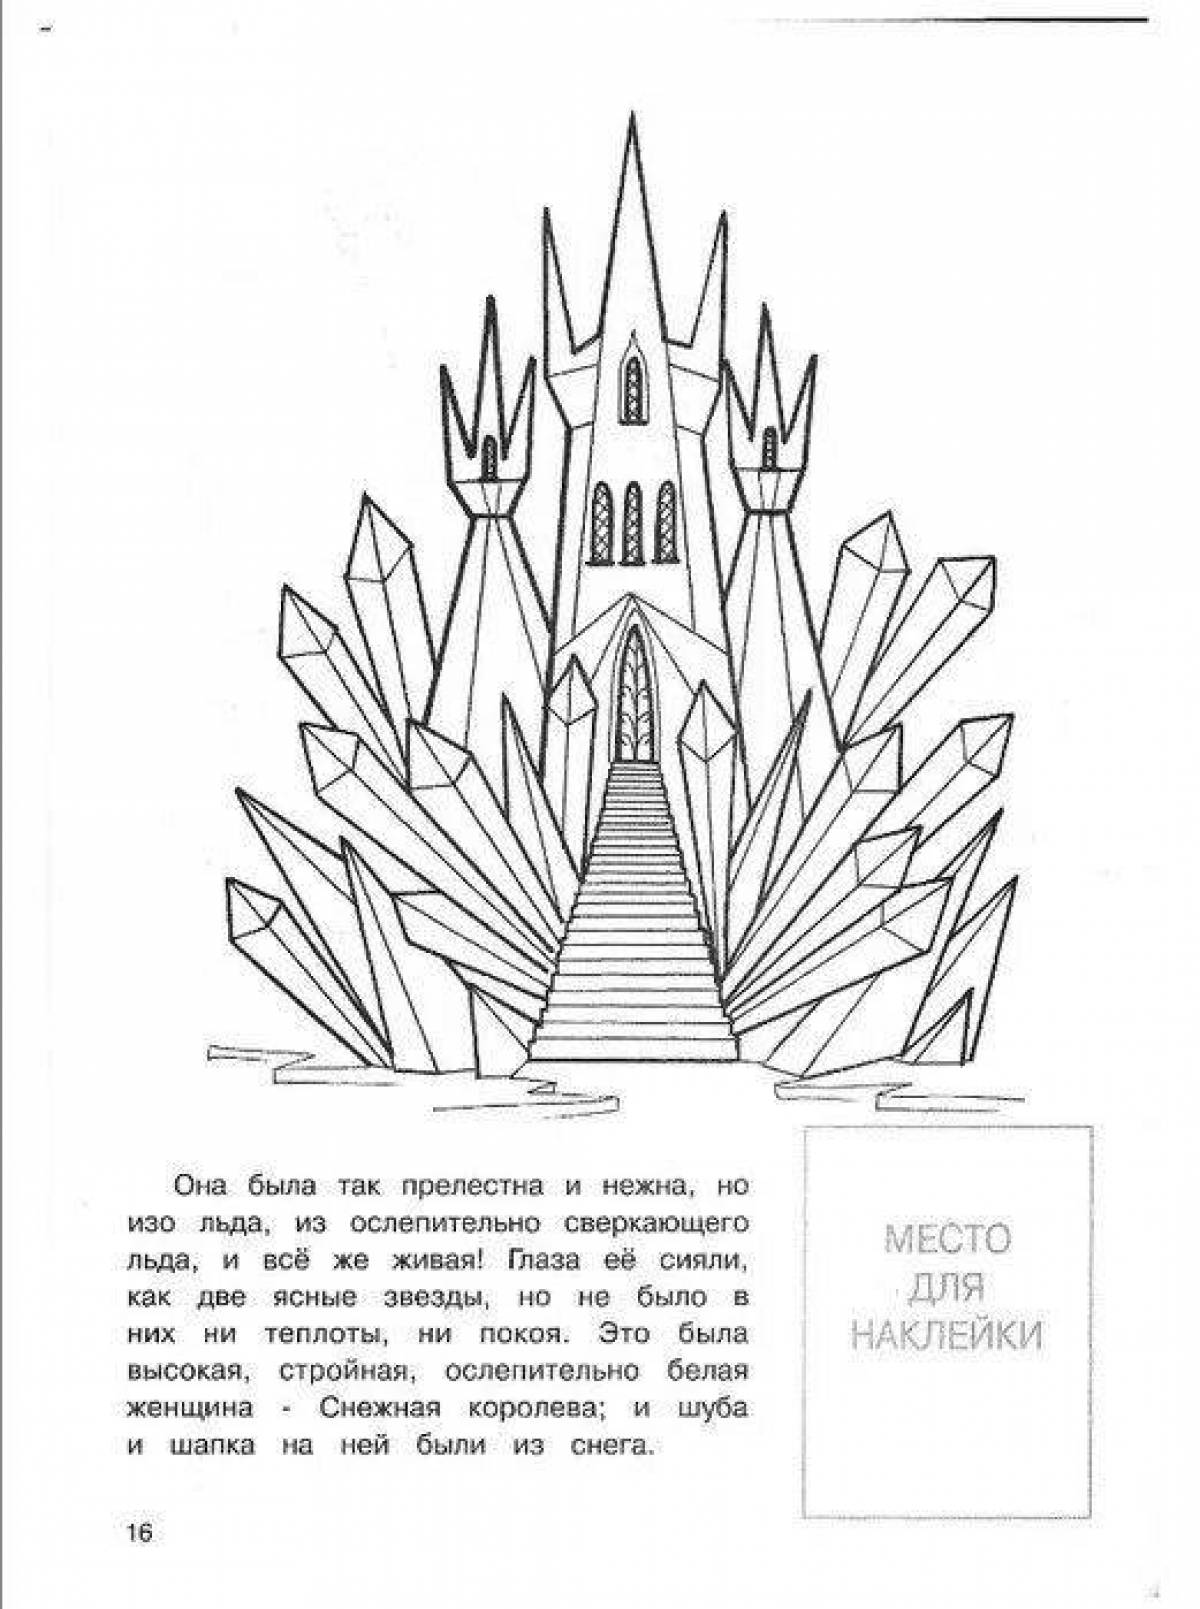 The Snow Queen's Exquisite Castle Coloring Page